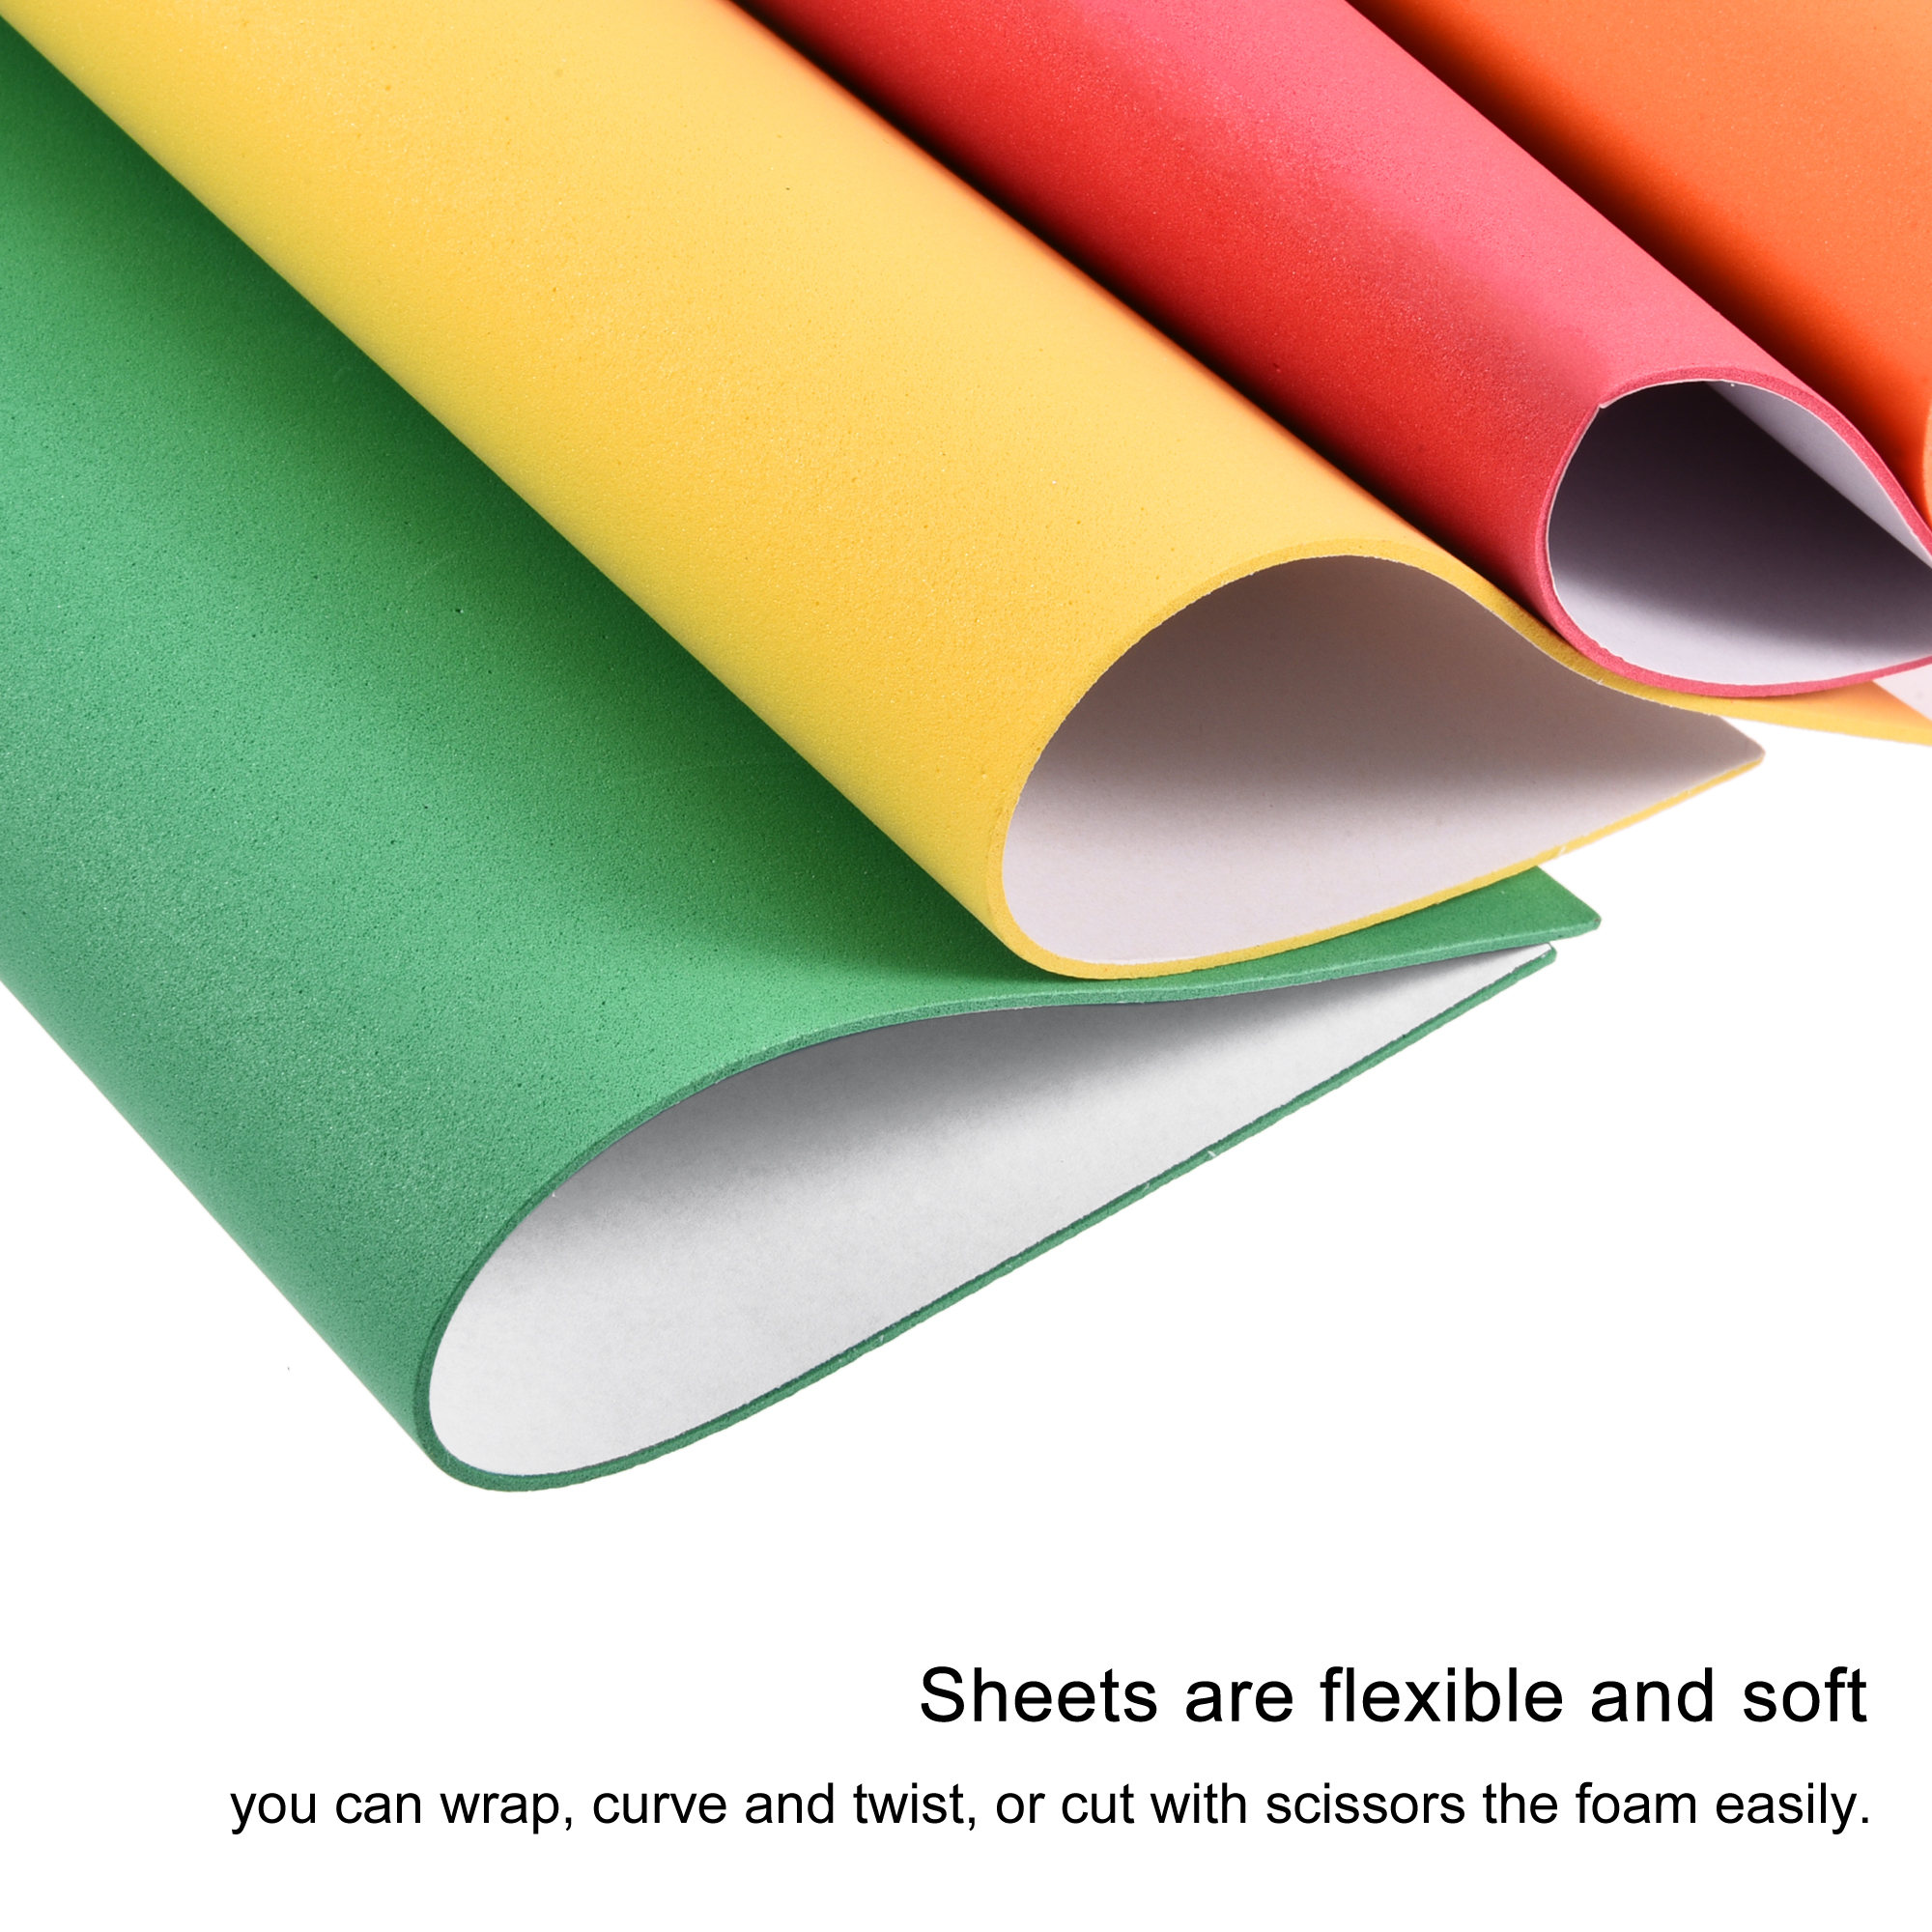 Uxcell Colorful Eva Foam Sheets Self Adhesive 7.8 x 11.8 inch 1.8mm Thickness for Crafts DIY, 1 Set